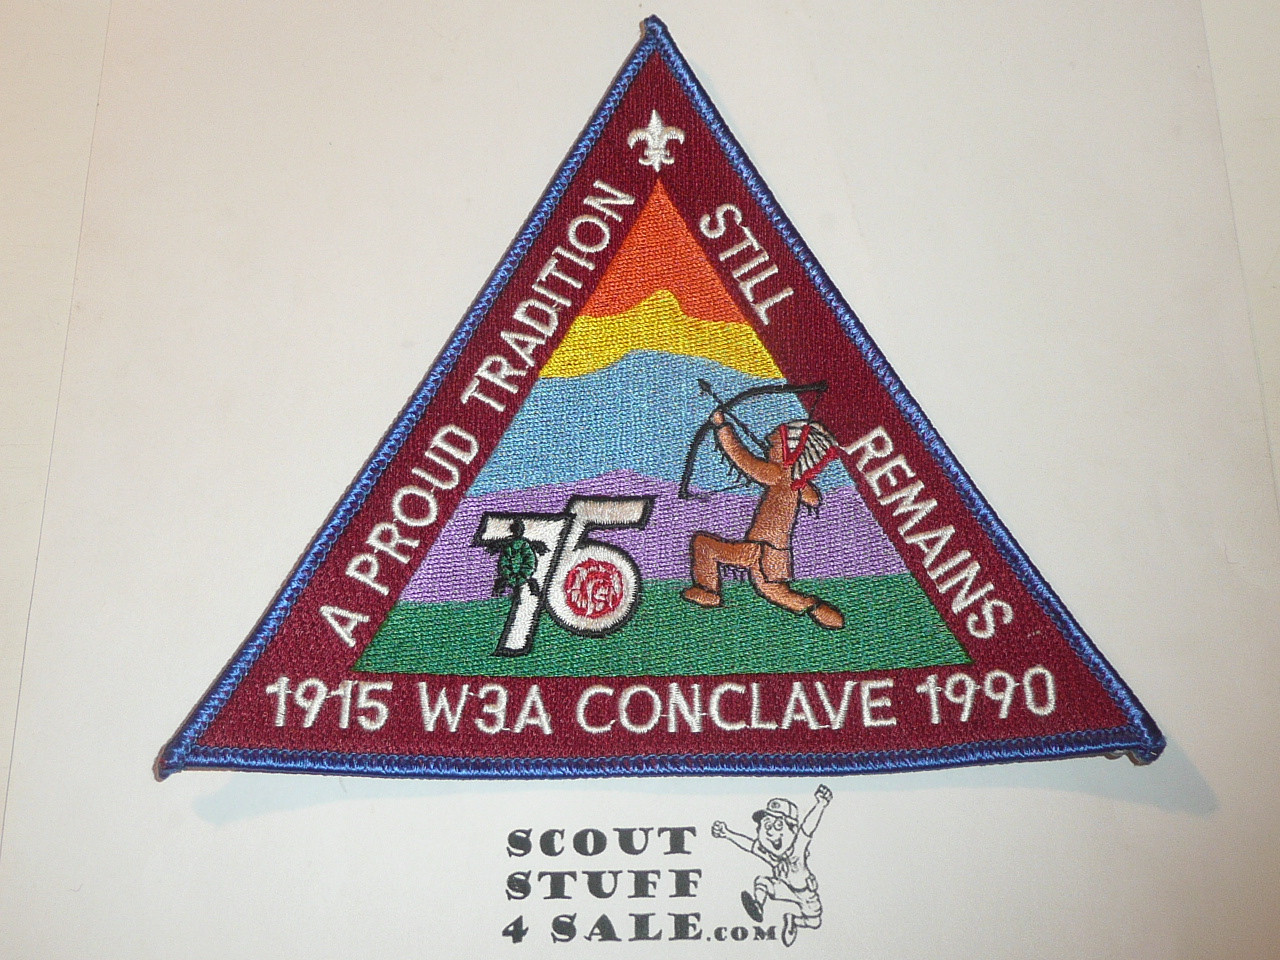 Section W3A 1990 O.A. Conclave Jacket Patch - Scout